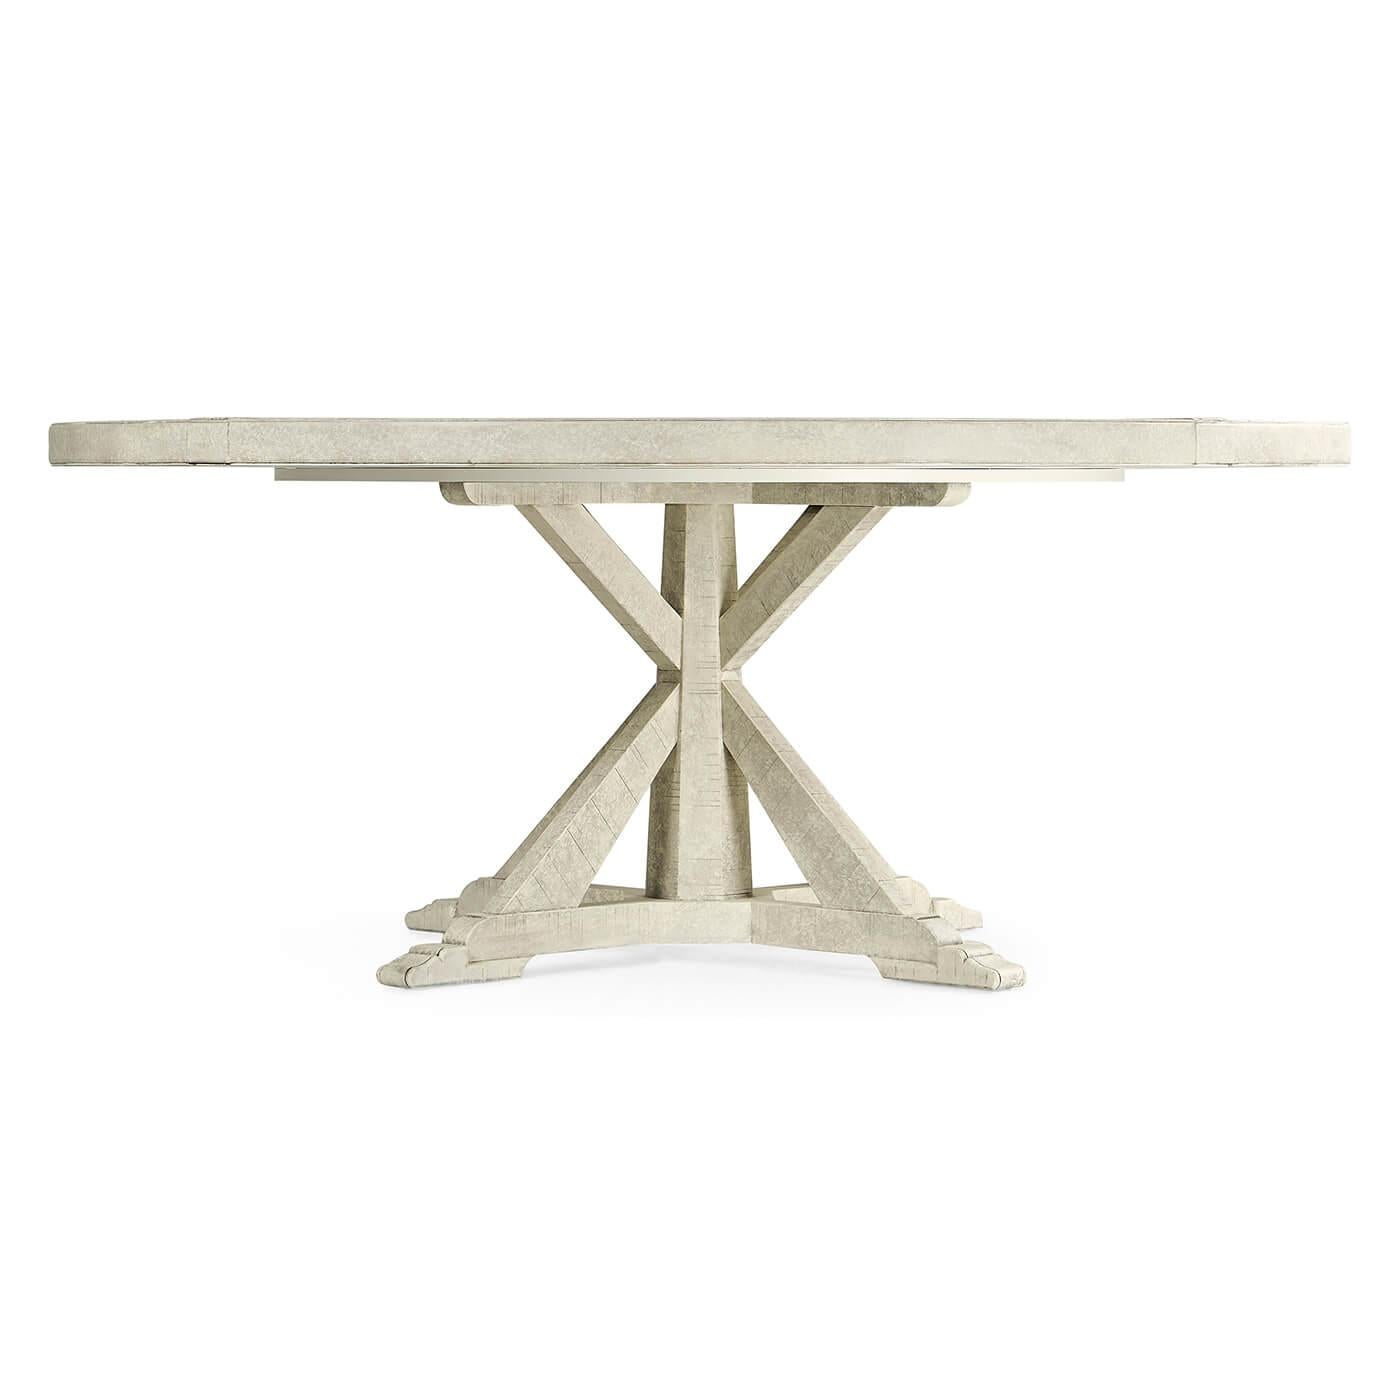 A large round dining table finished in our whitewash color with a rustic finish showing exposed saw marks and set on a bracketed country kitchen base, the table also has a built-in self-storing Lazy Susan.

Dimensions: 72